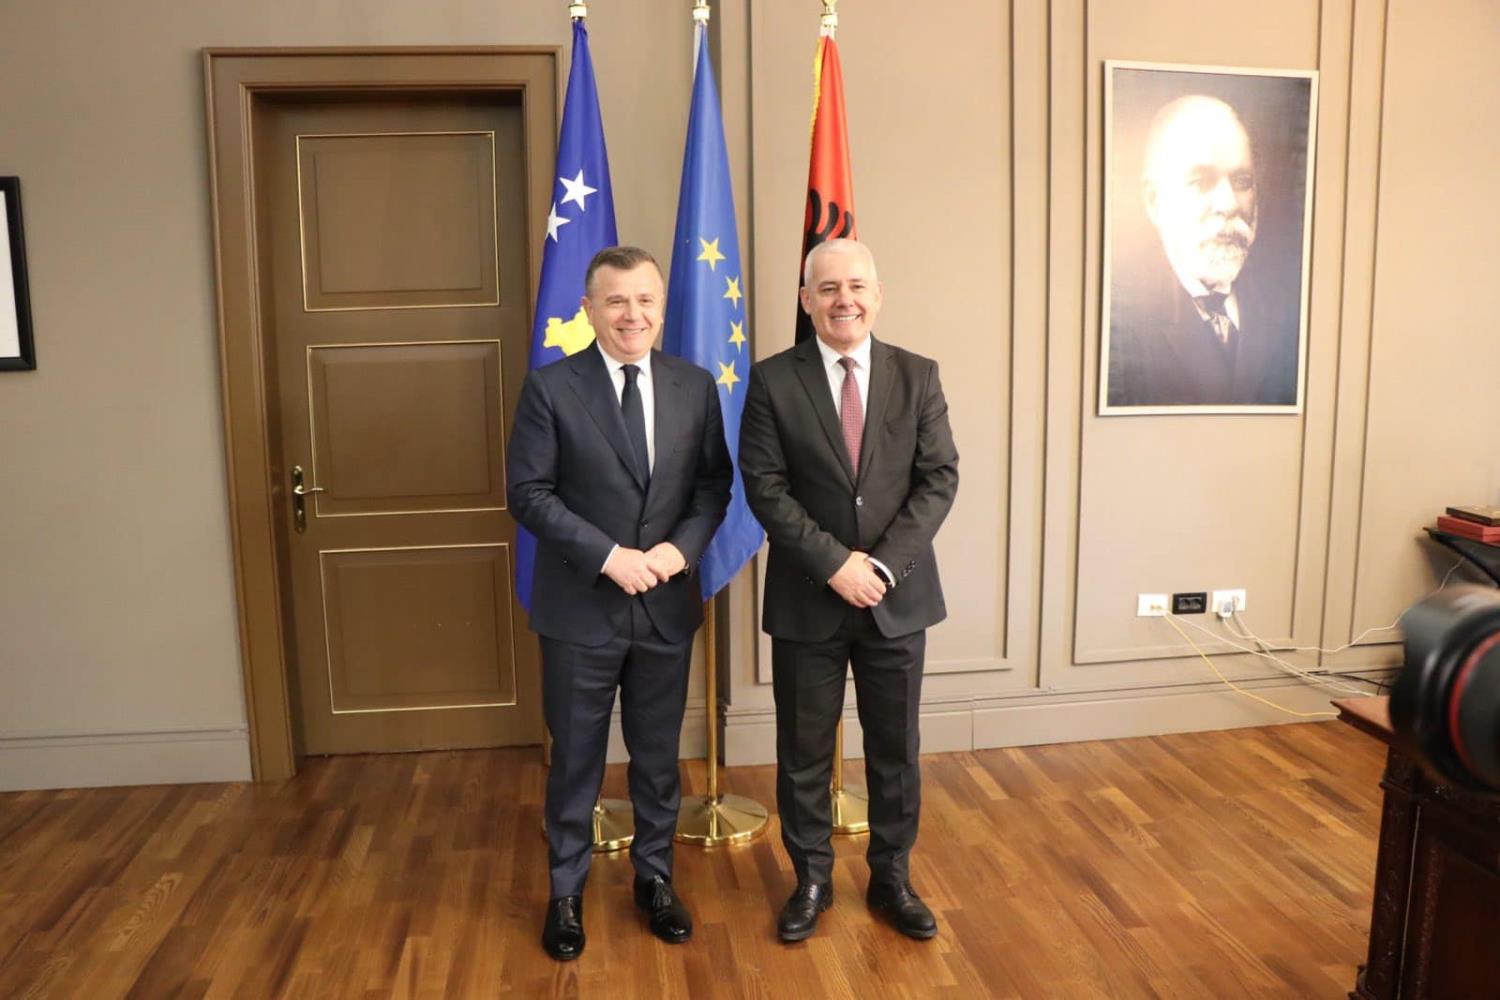 Minister of Internal Affairs, Mr. Xhelal Sveçla, during his official visit to the Republic of Albania, met with his counterpart, Minister Mr. Taulant Balla.